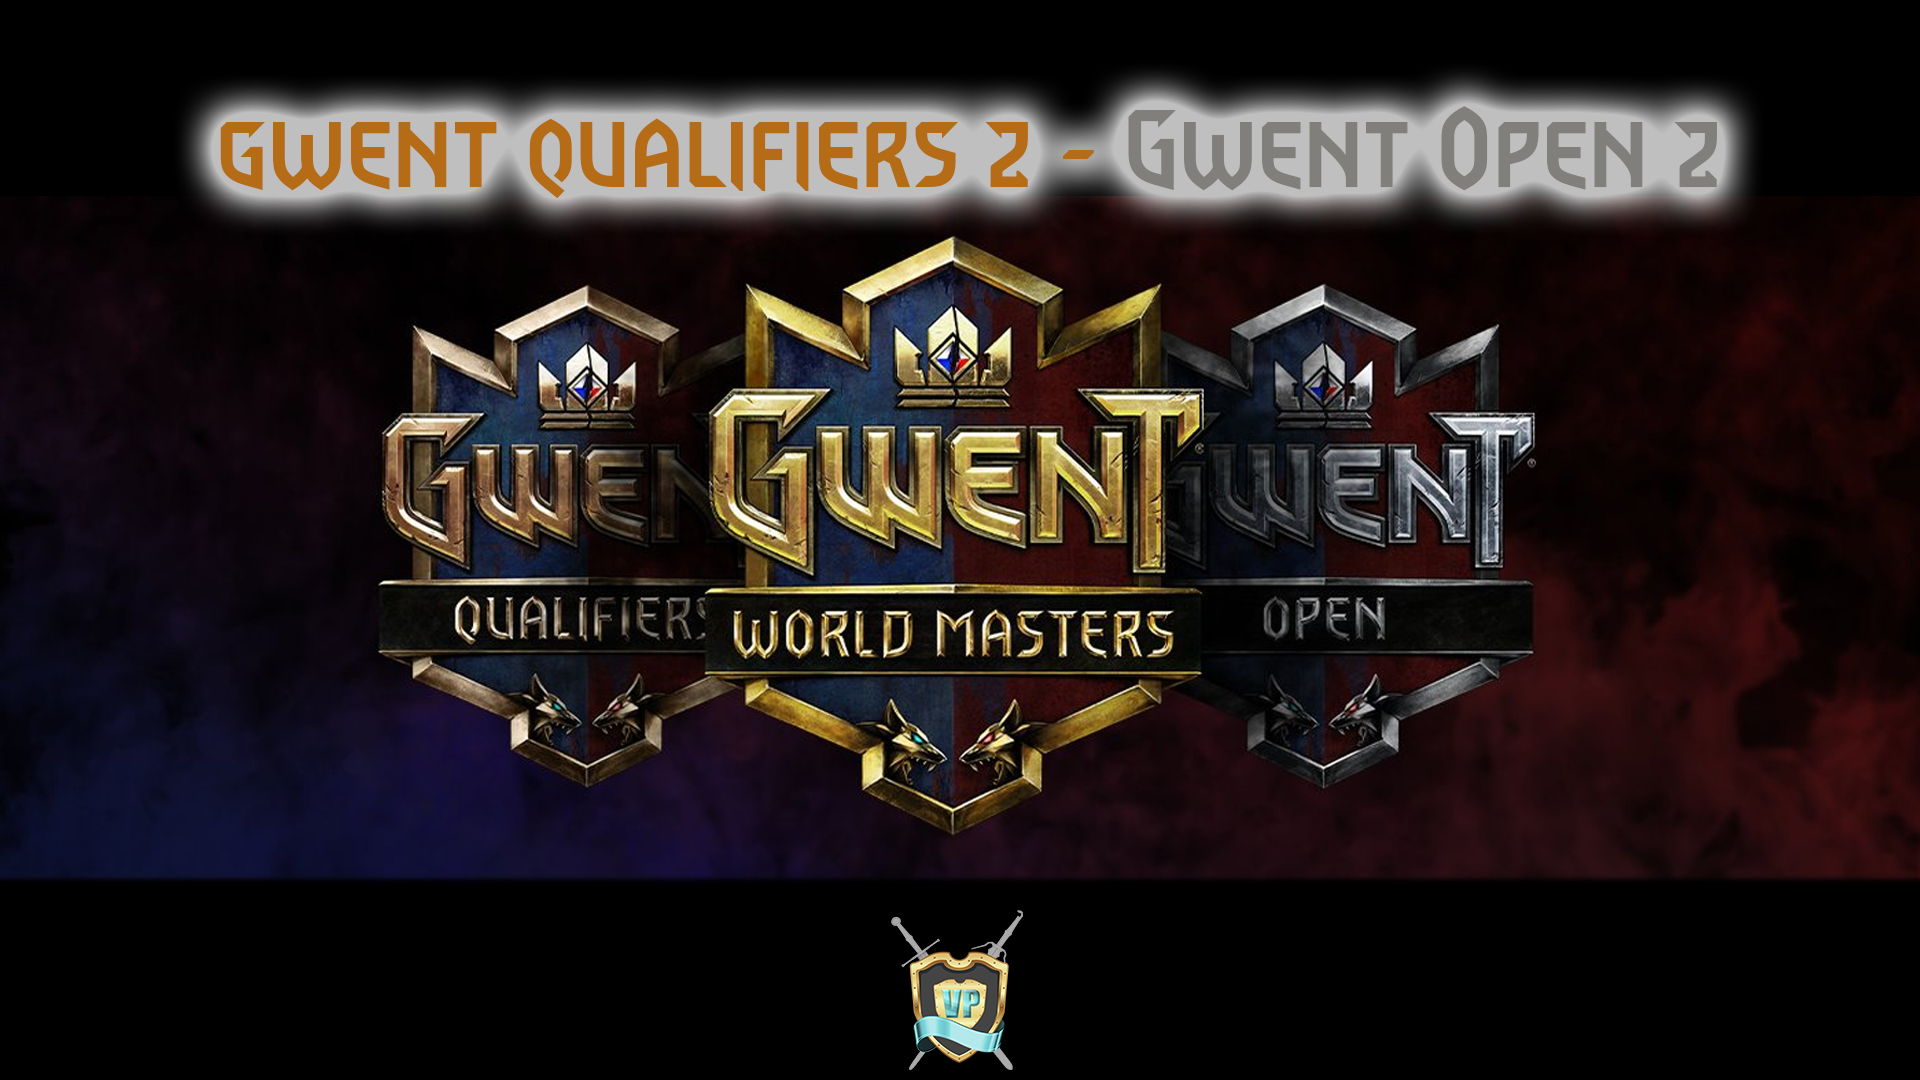 Gwent Qualifiers 2 Gwent Open 2